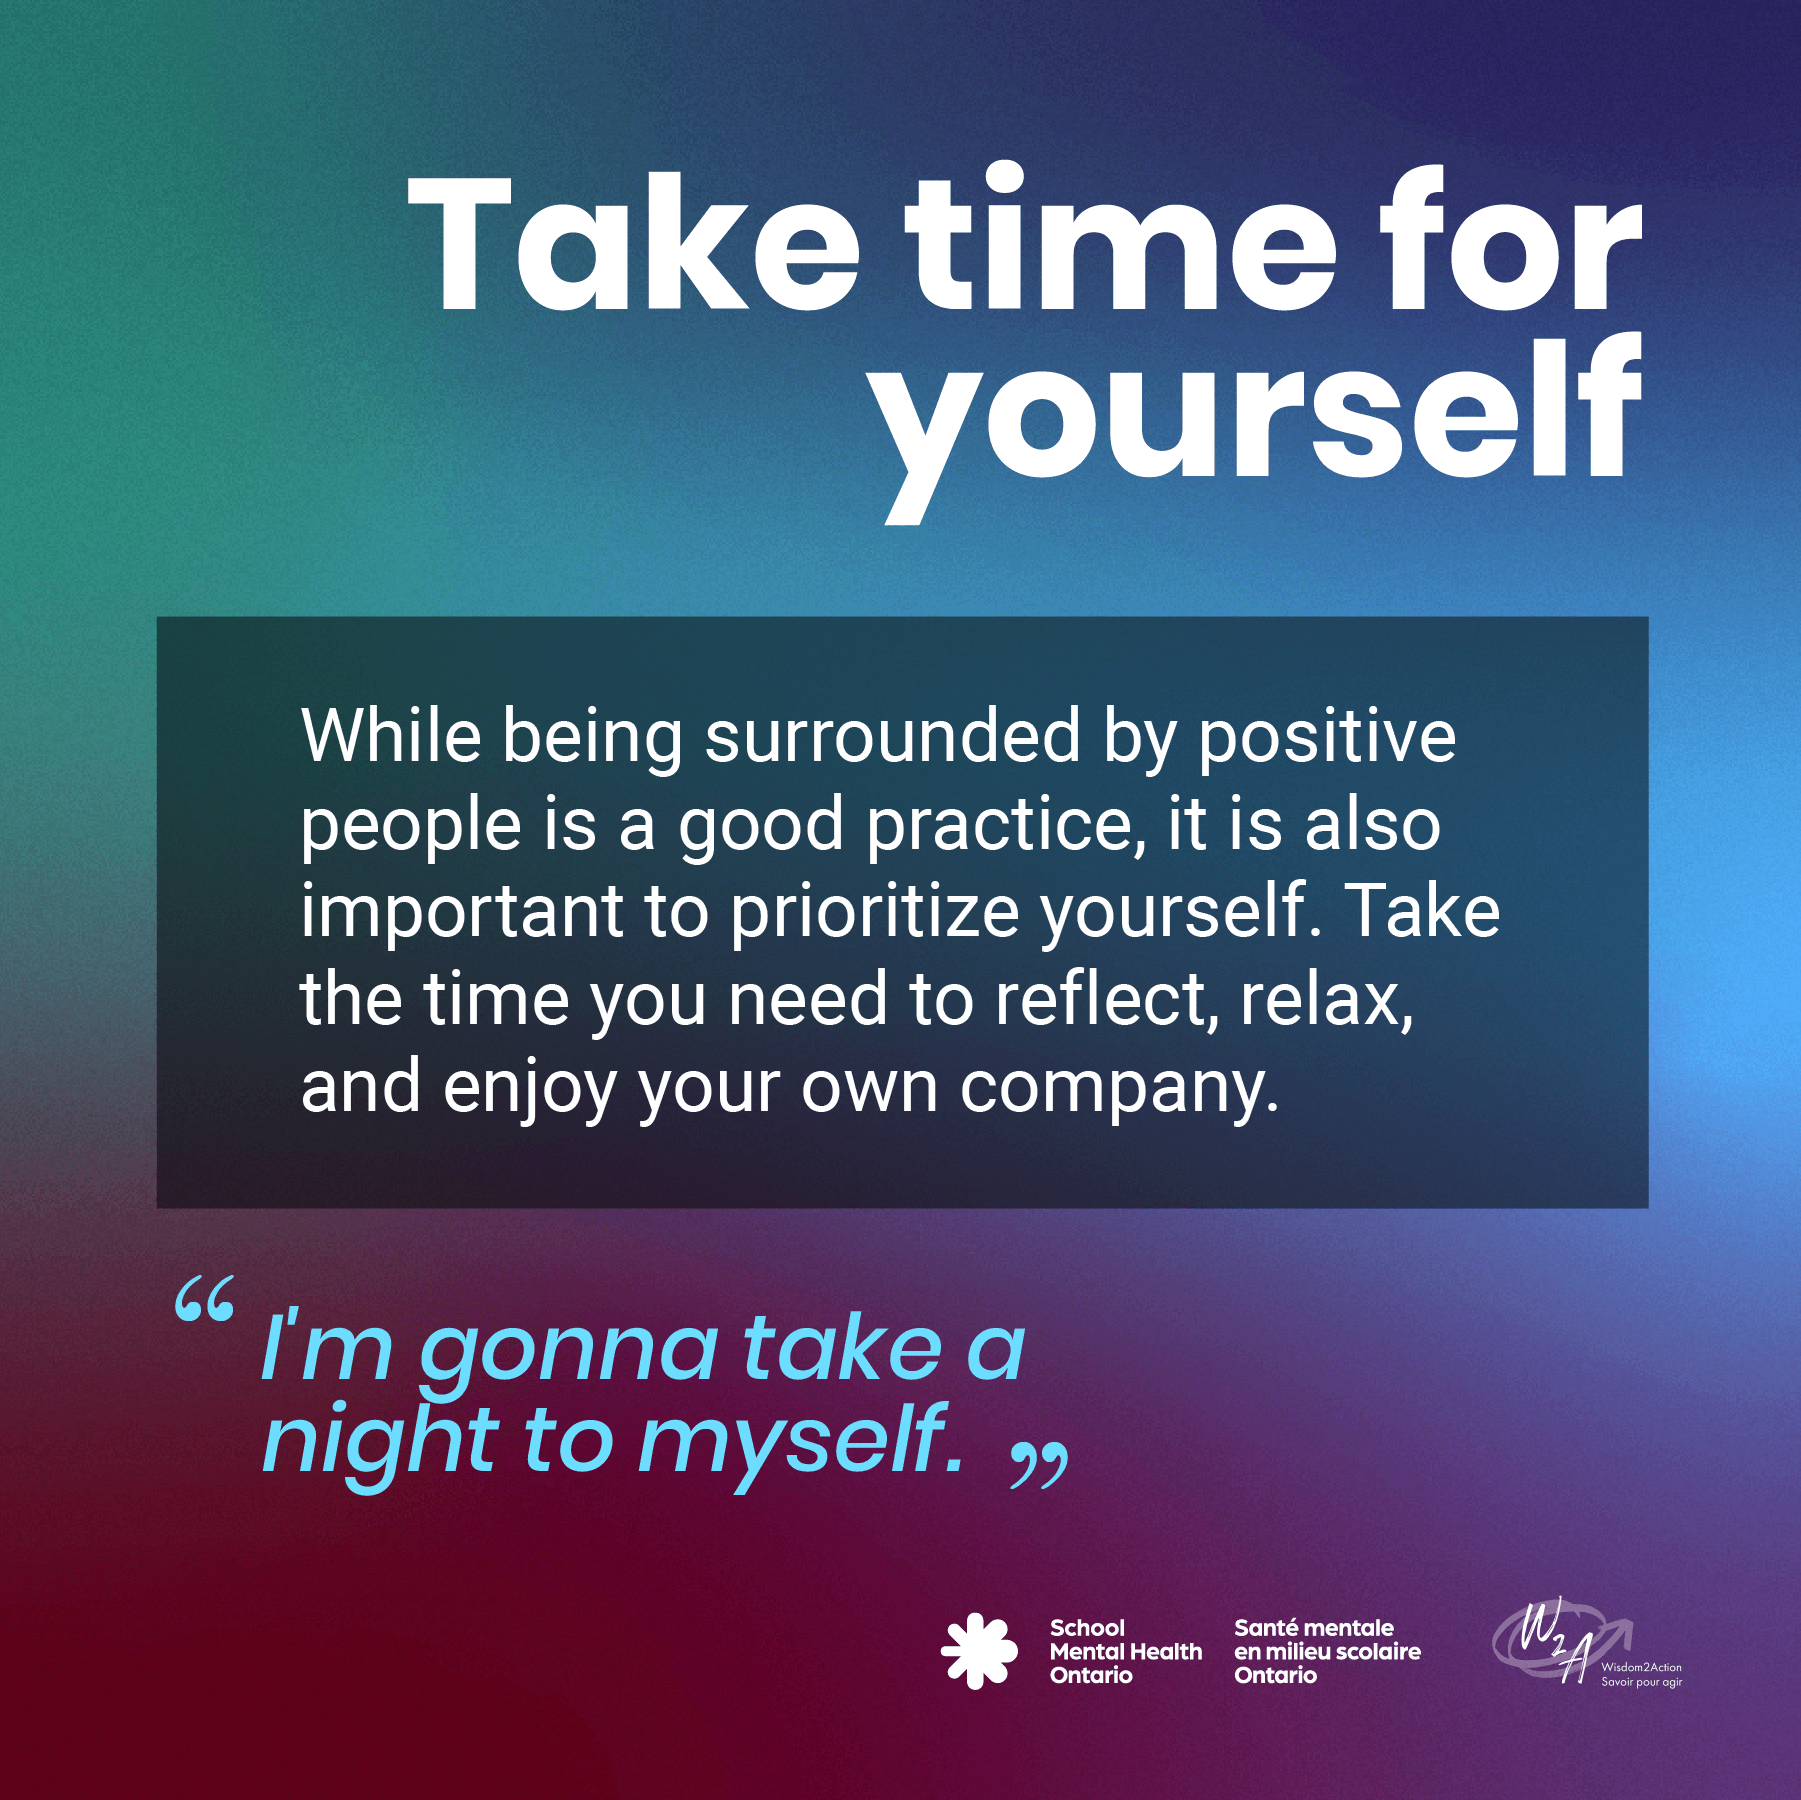 Take time for yourself - see full description of image below.